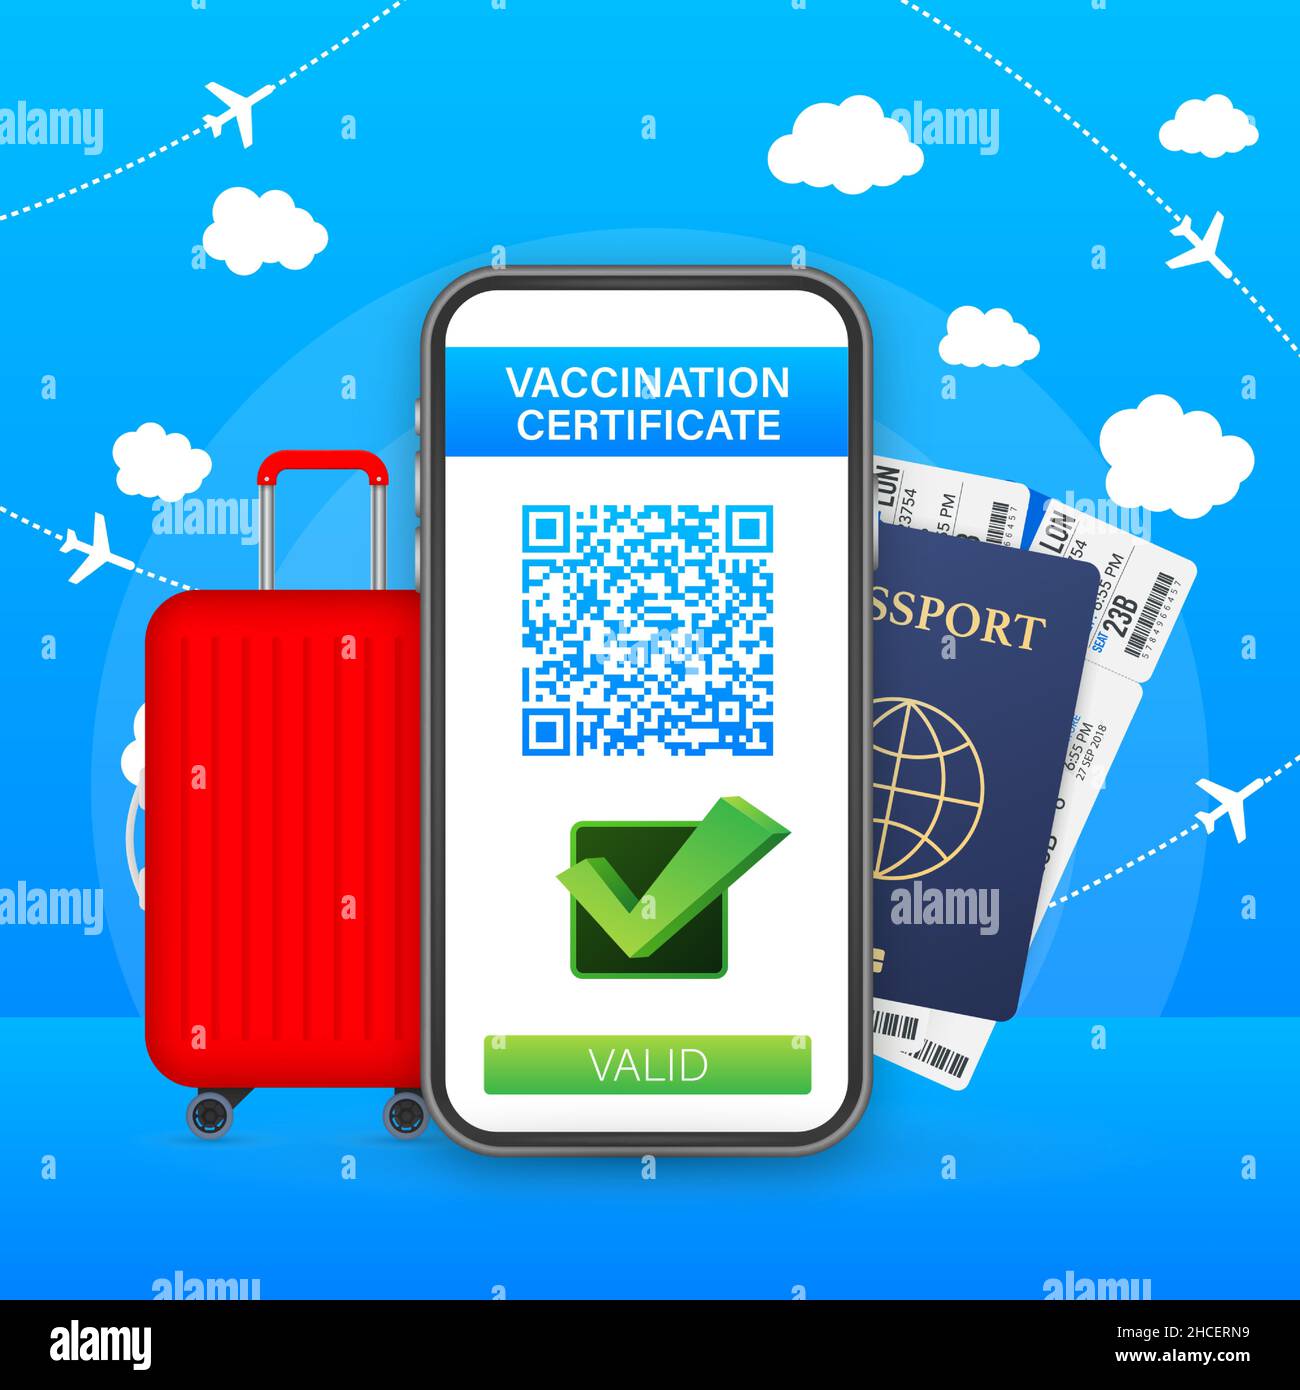 Health Passport on Mobile Phone Screen with Qr-code and Check Mark